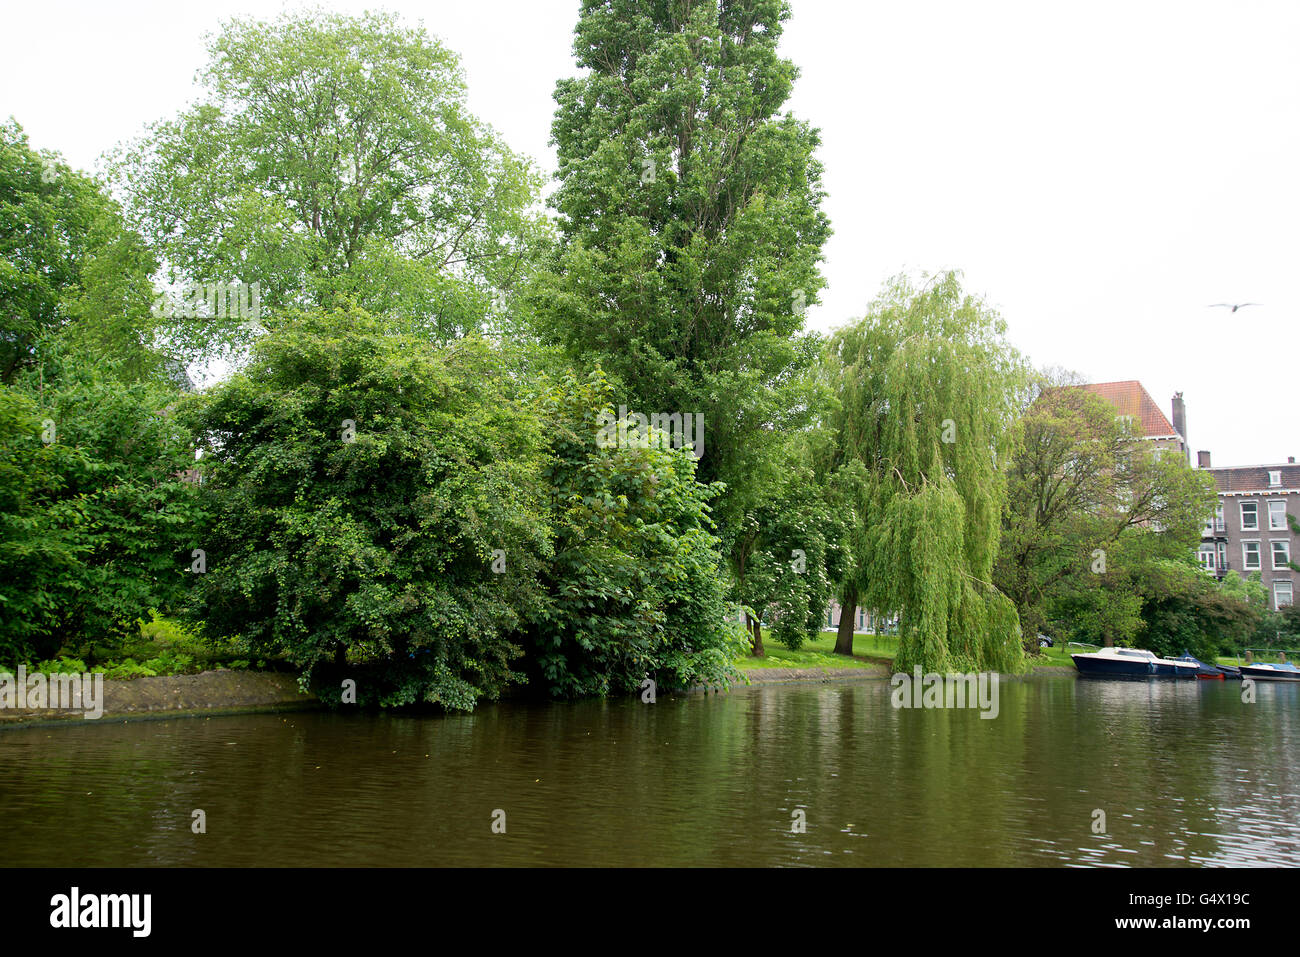 Weeping willow trees and greenery along the banks of the Artis canal in Amsterdam city center. Stock Photo